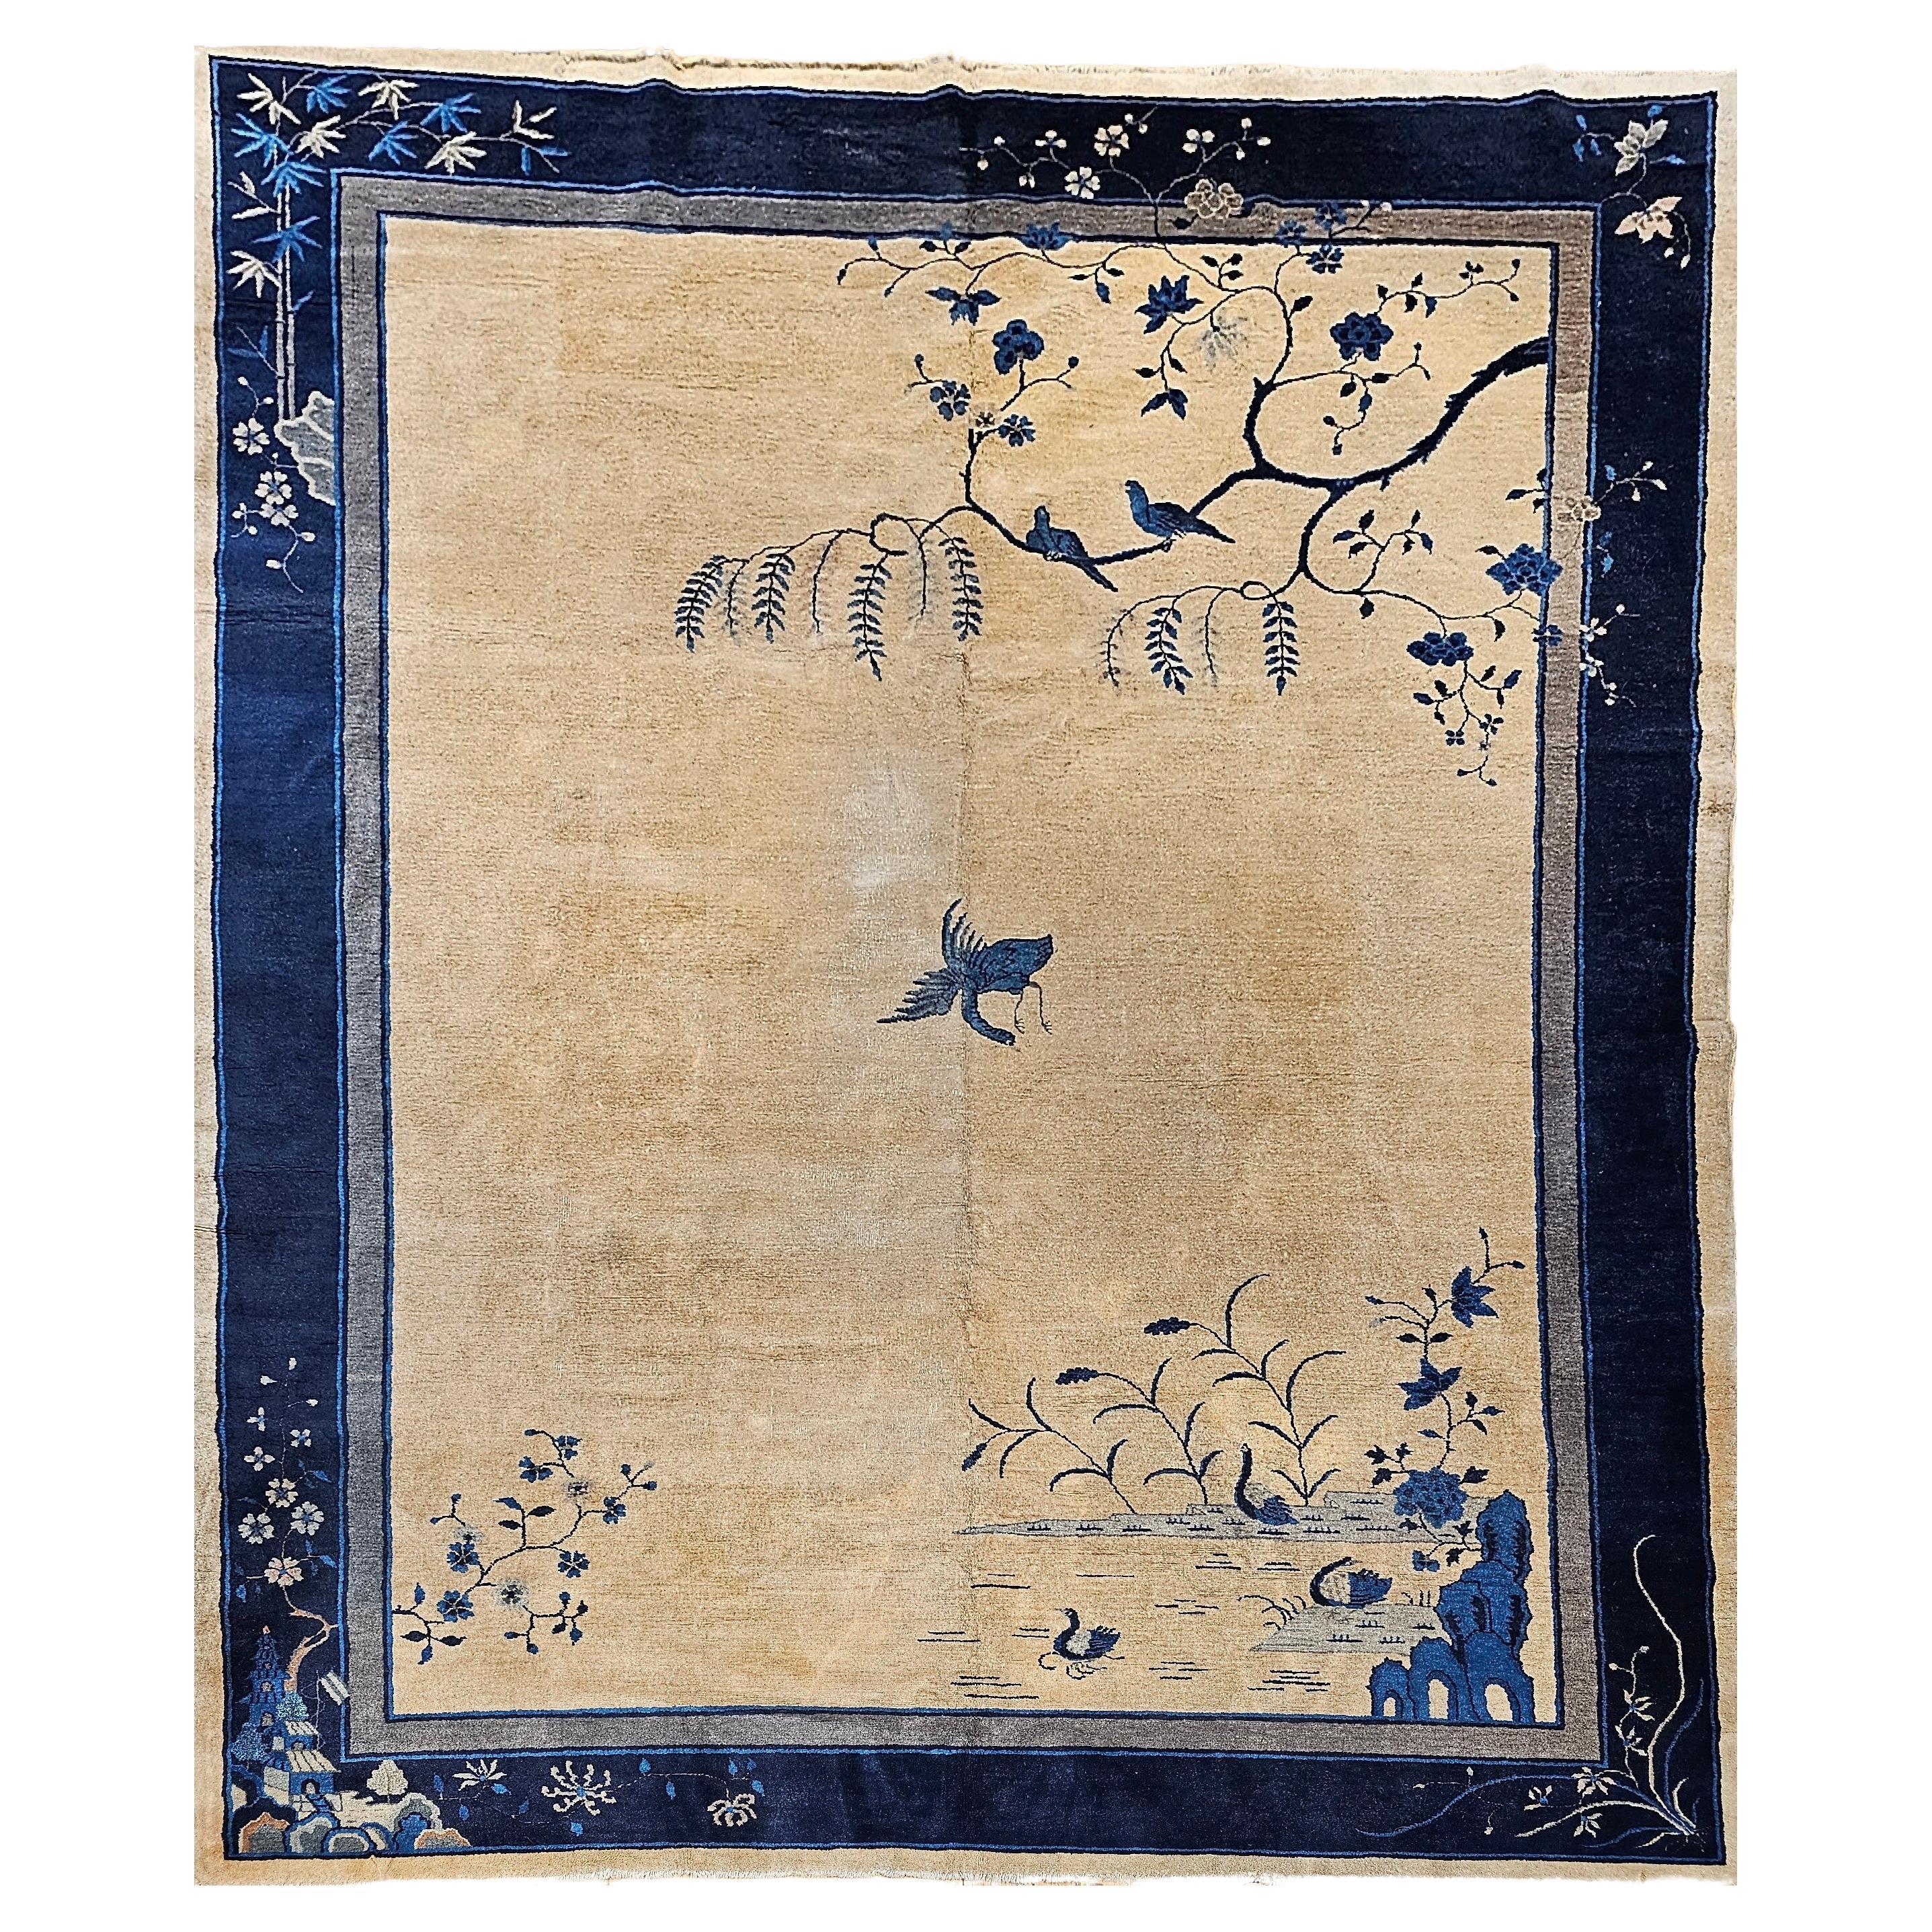 Vintage Art Deco Chinese Rug with Cranes, Pagoda, Mountains in Wheat, Blue, Navy For Sale